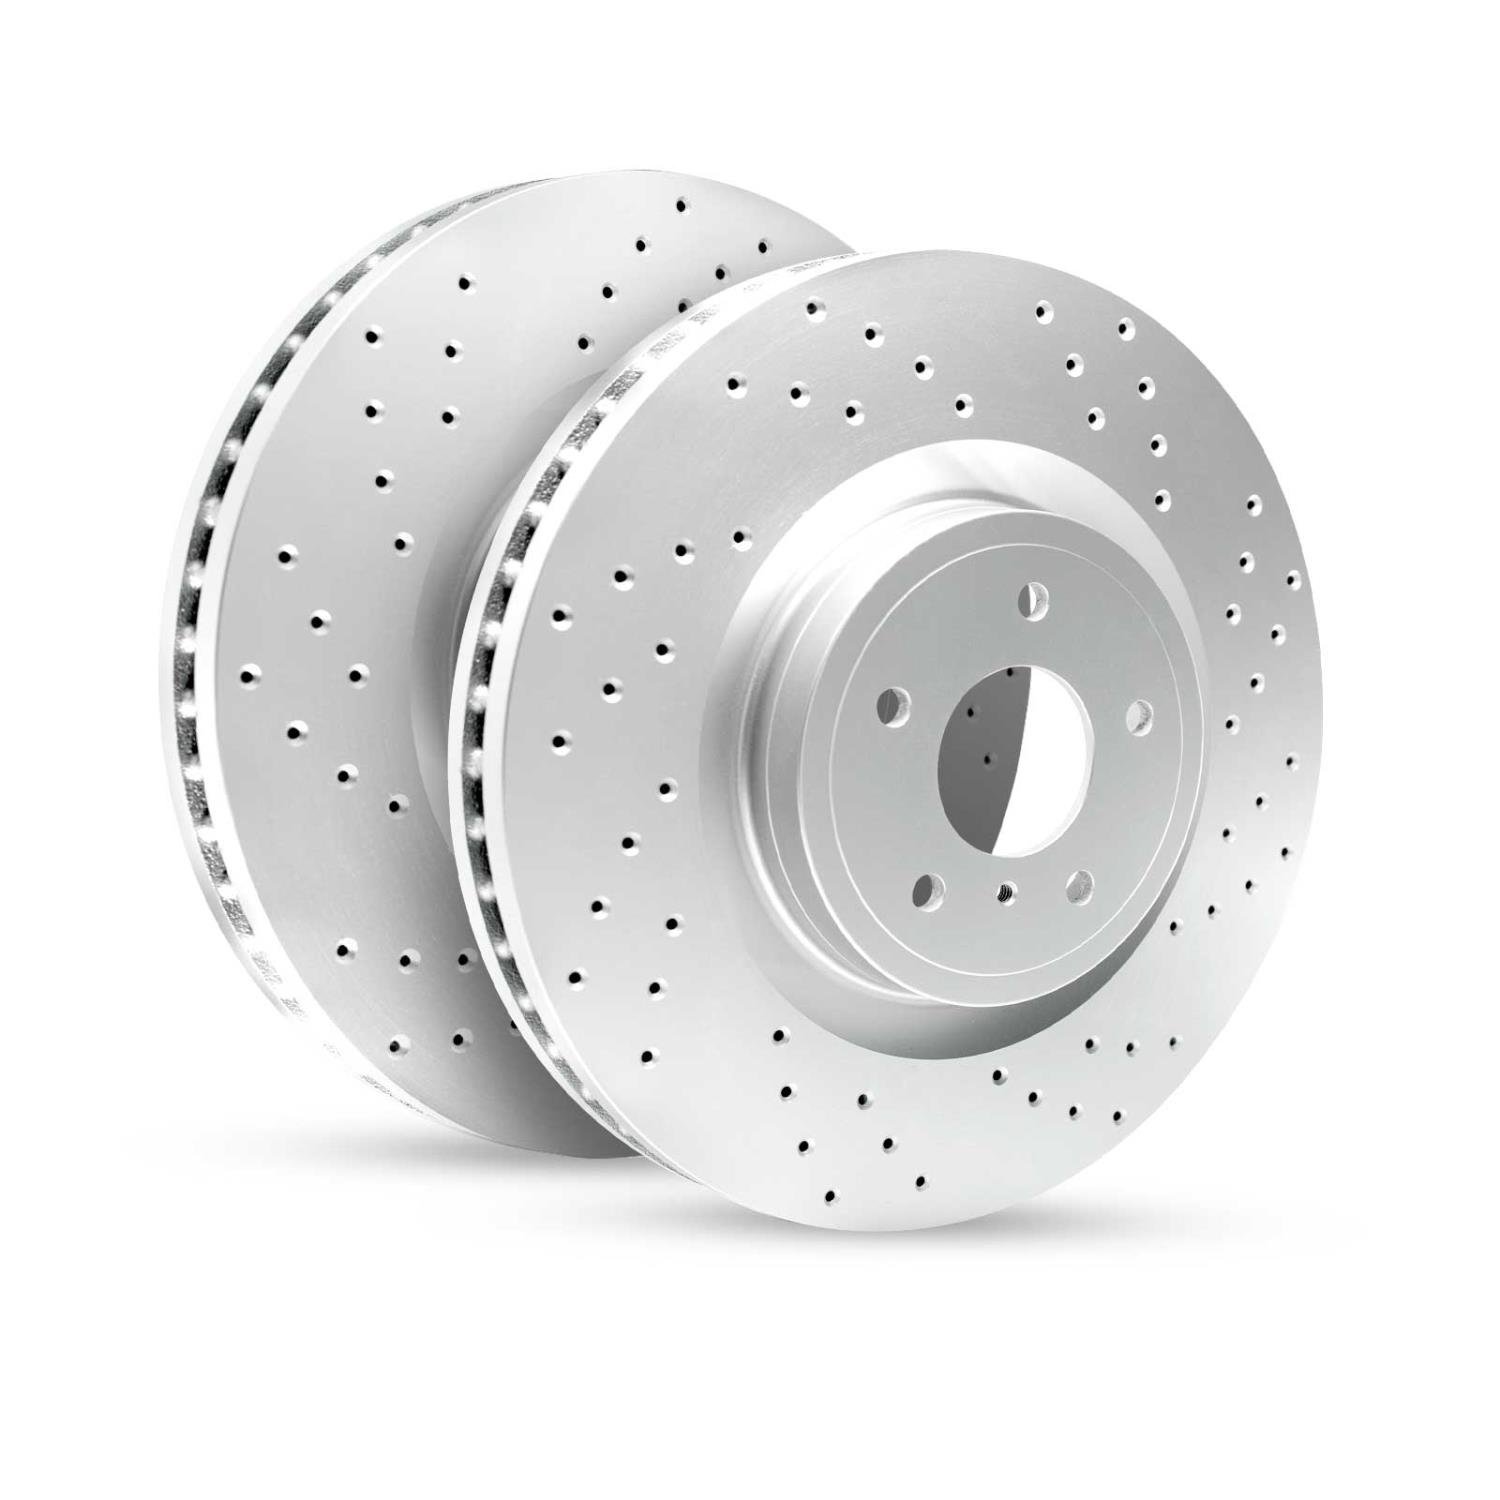 GEO-Carbon Drilled/Slotted Rotors, 2005-2012 Acura/Honda,